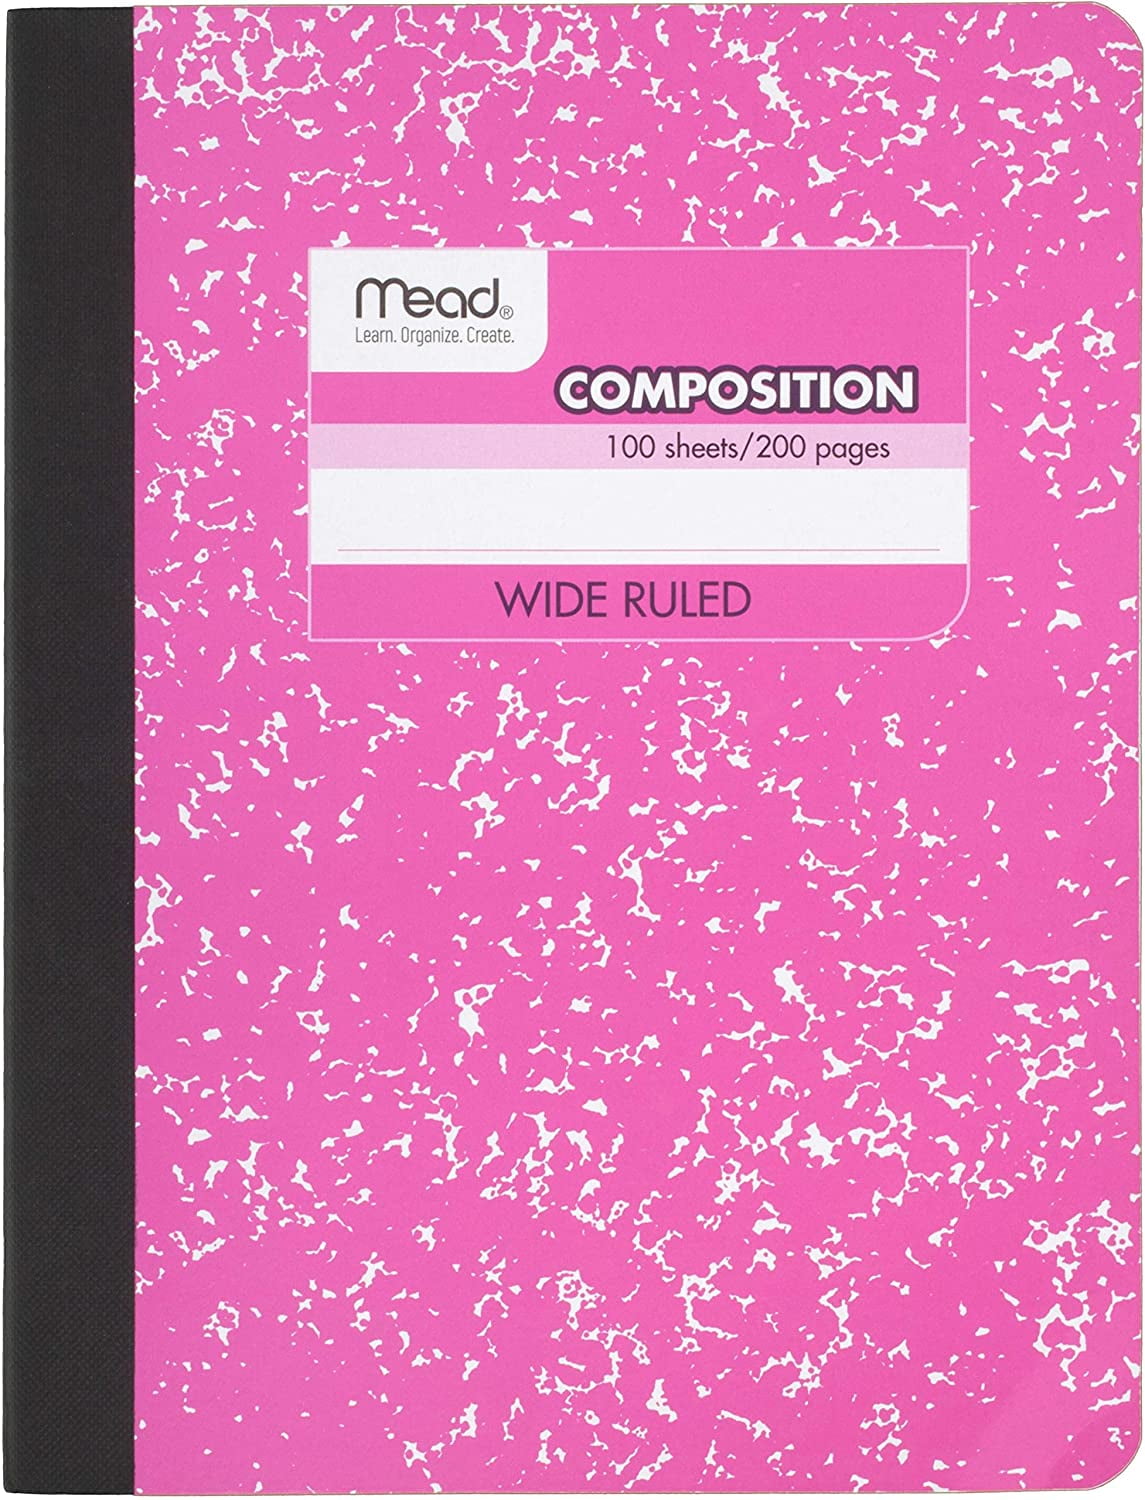 100 sheets Pastel Color Notebook Wide Rule paper 12 Pack of Wide Ruled Composition Notebooks 200 Pages Mead Composition Book 